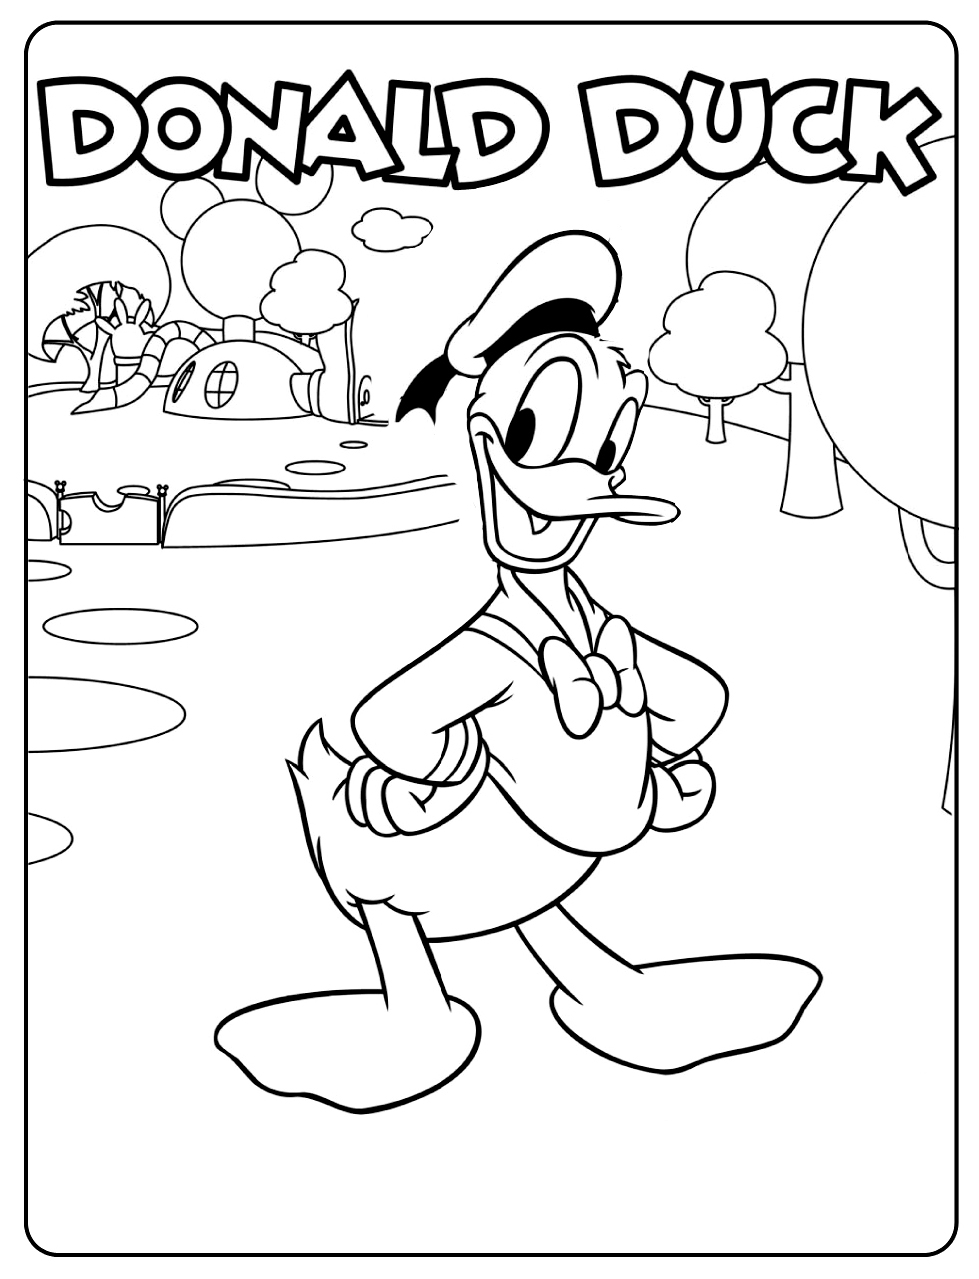 Coloring Donald in front of Mickey's house